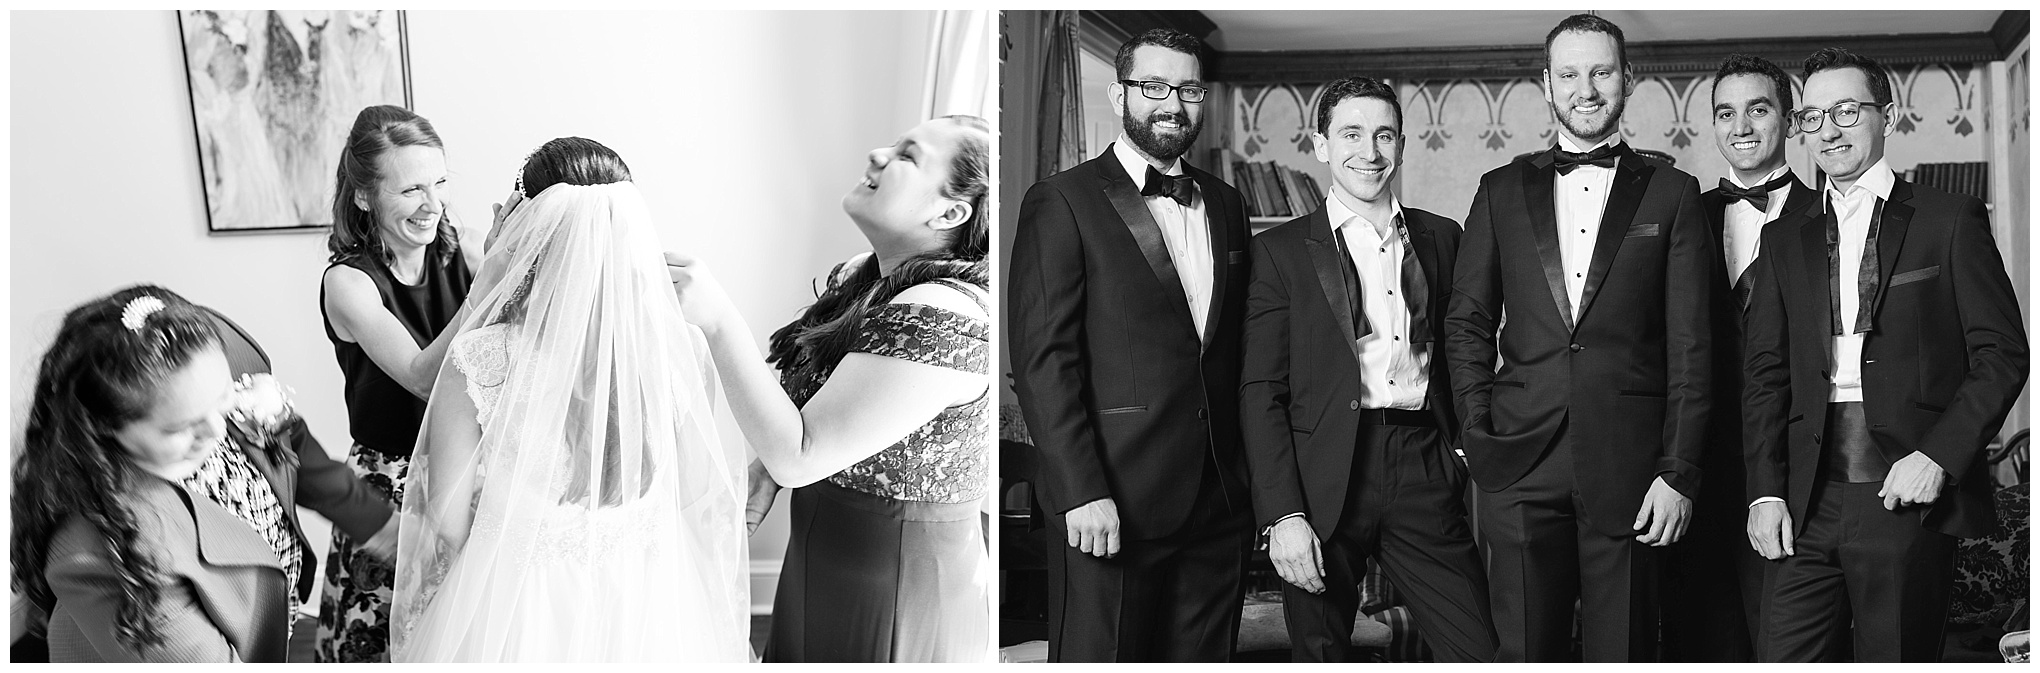 make the most of your wedding photography, groomsmen, groom, getting ready, bridesmaids